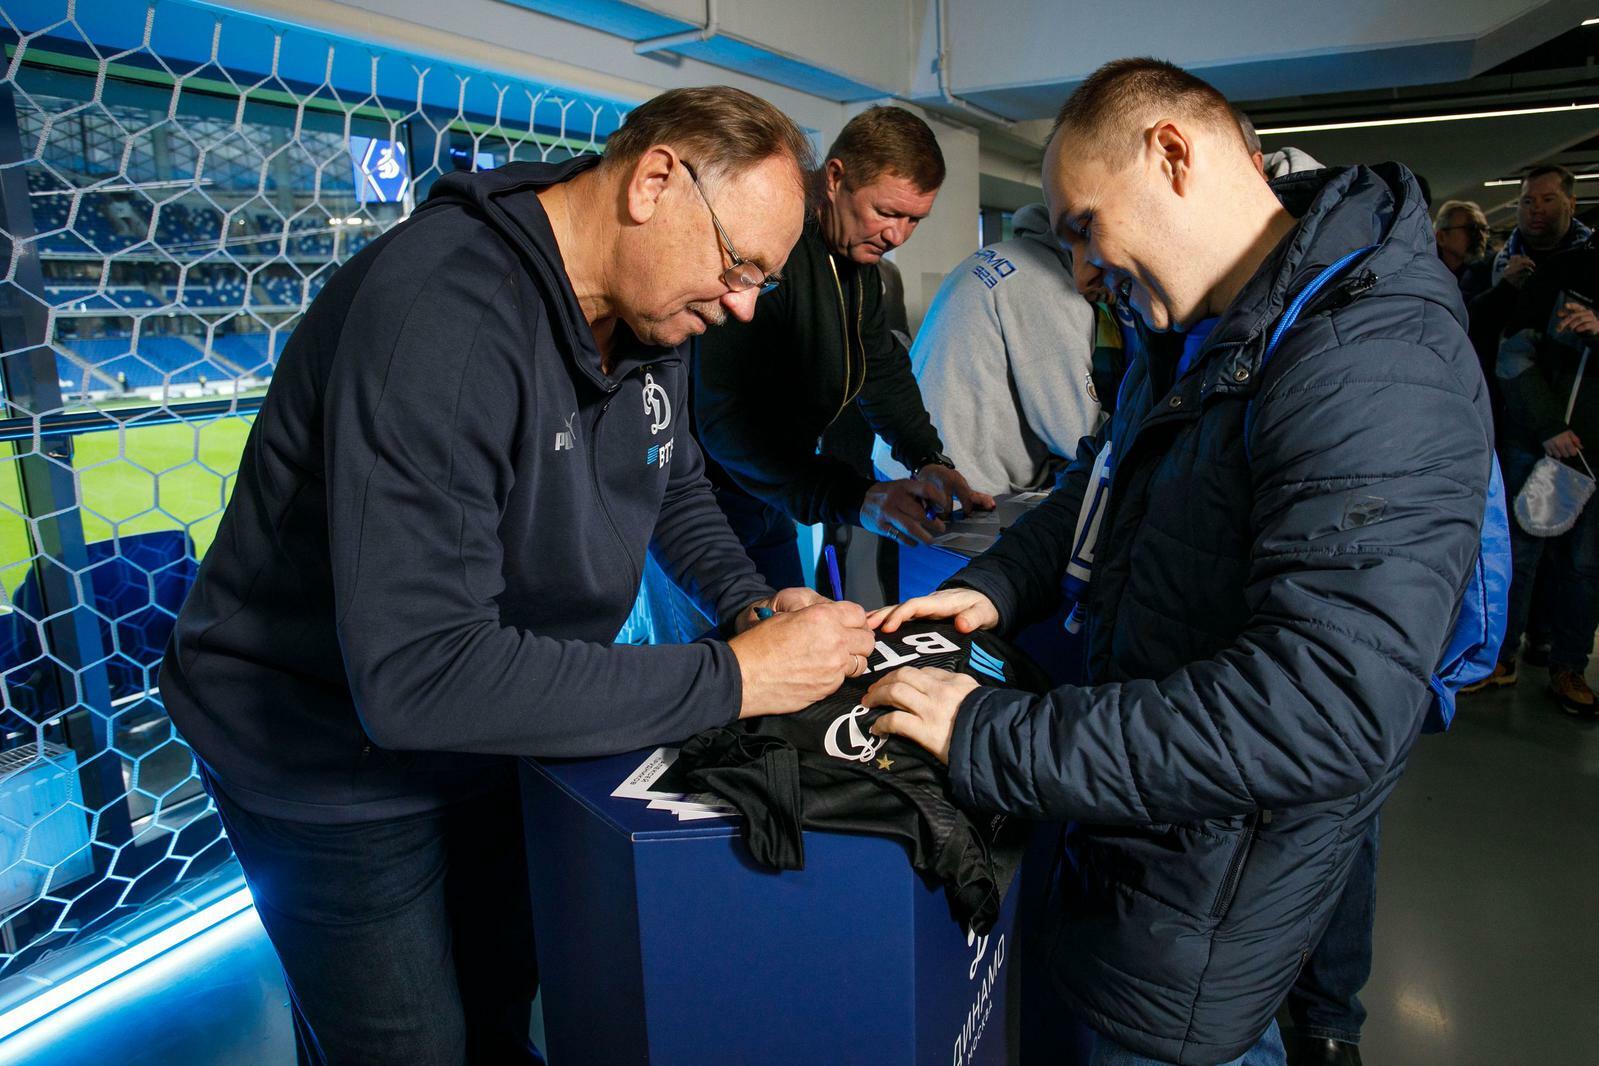 FC Dynamo Moscow News | Autograph sessions with celebrated Dynamo players will take place at the VTB Arena before the derby. Dynamo, Dynamo Moscow, Football, Football 2023, Football 2024, Russian Premier League, match, news, today's news, Russia news, fresh news, sports news, football news, Russian football news, latest football news, sports news, football club.